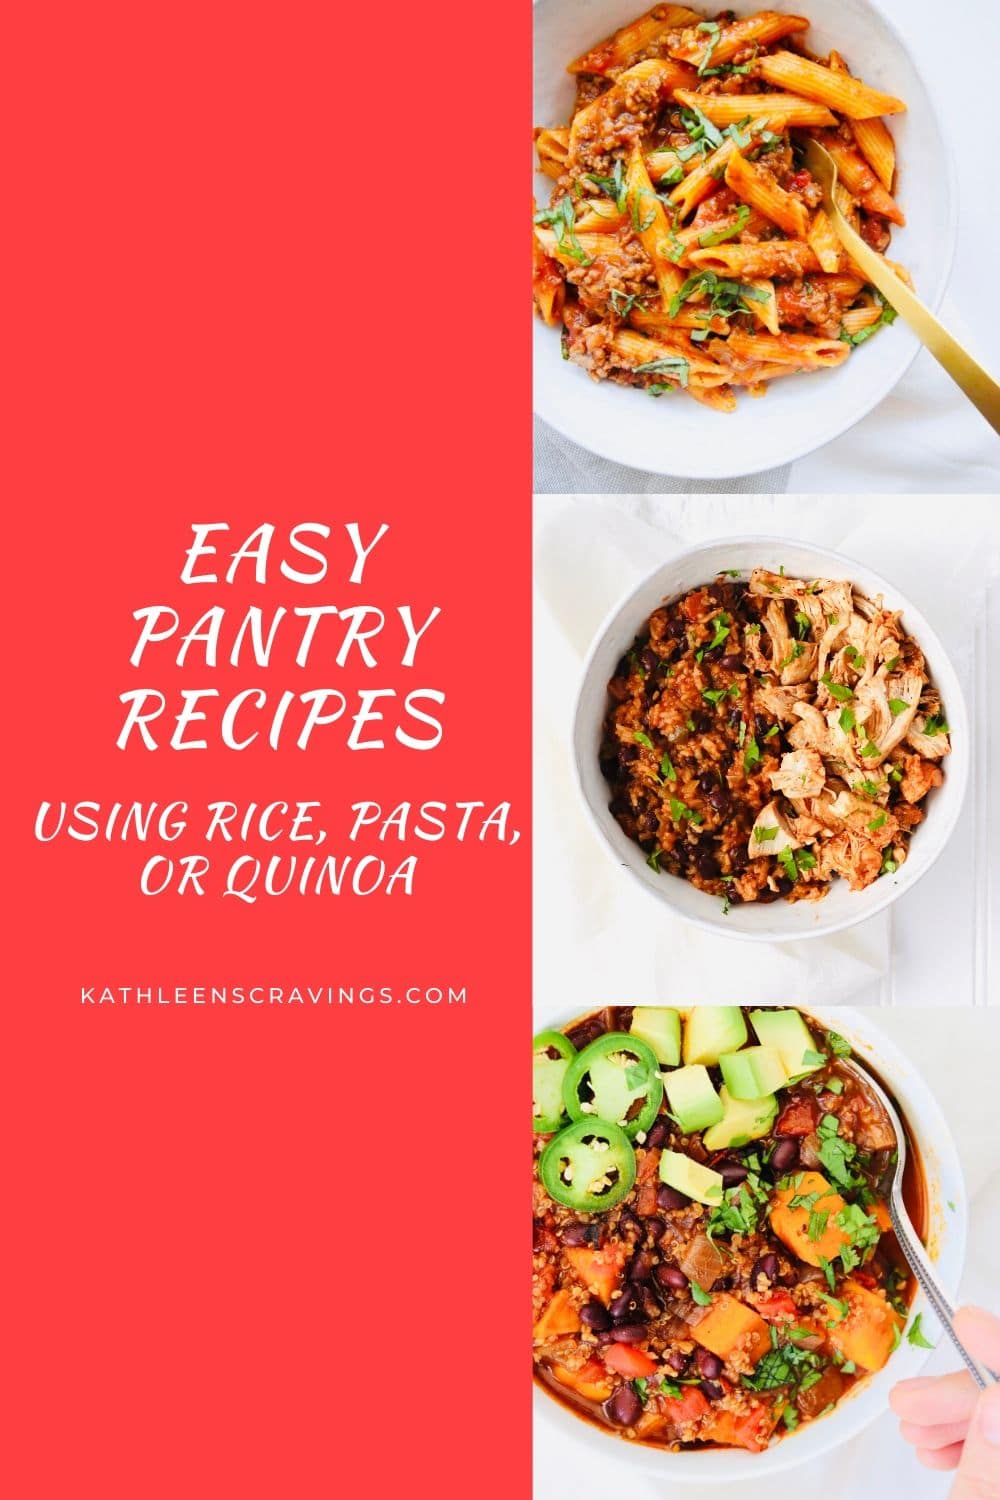 Are you wondering "What can I make for dinner with what I have in my pantry?" Some of my favorite pantry recipes that use either rice, pasta, or quinoa. They're perfect for using up the items you have on hand without having to go to the store.